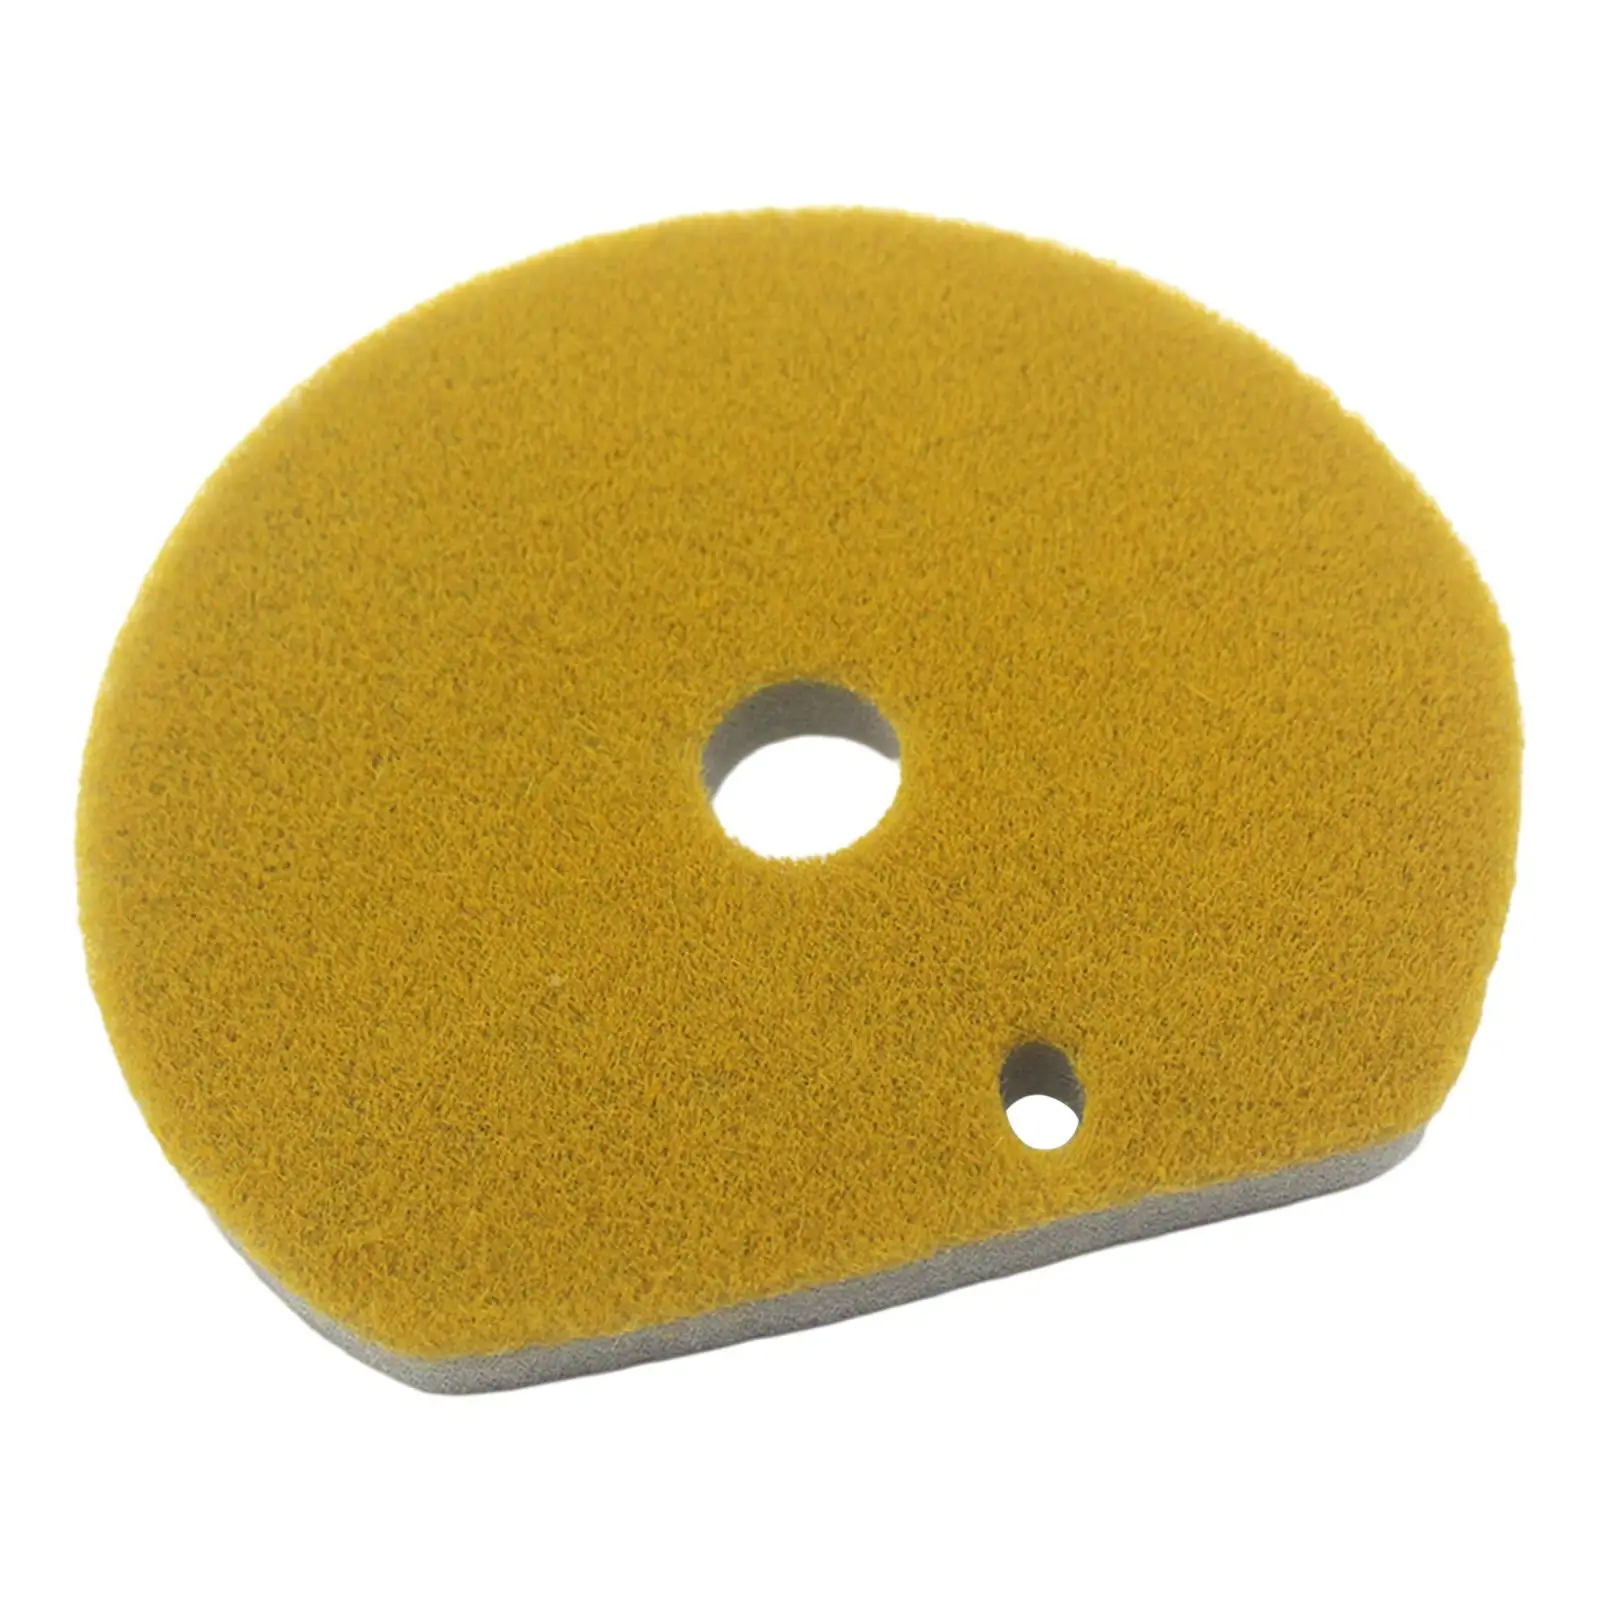  Filter, Automotive Motorcycle Replacement, CA-E5407-00 Air Filters Foam Pad, Motorcycle Foam Sponge, Fit for  Majesty 125Cc